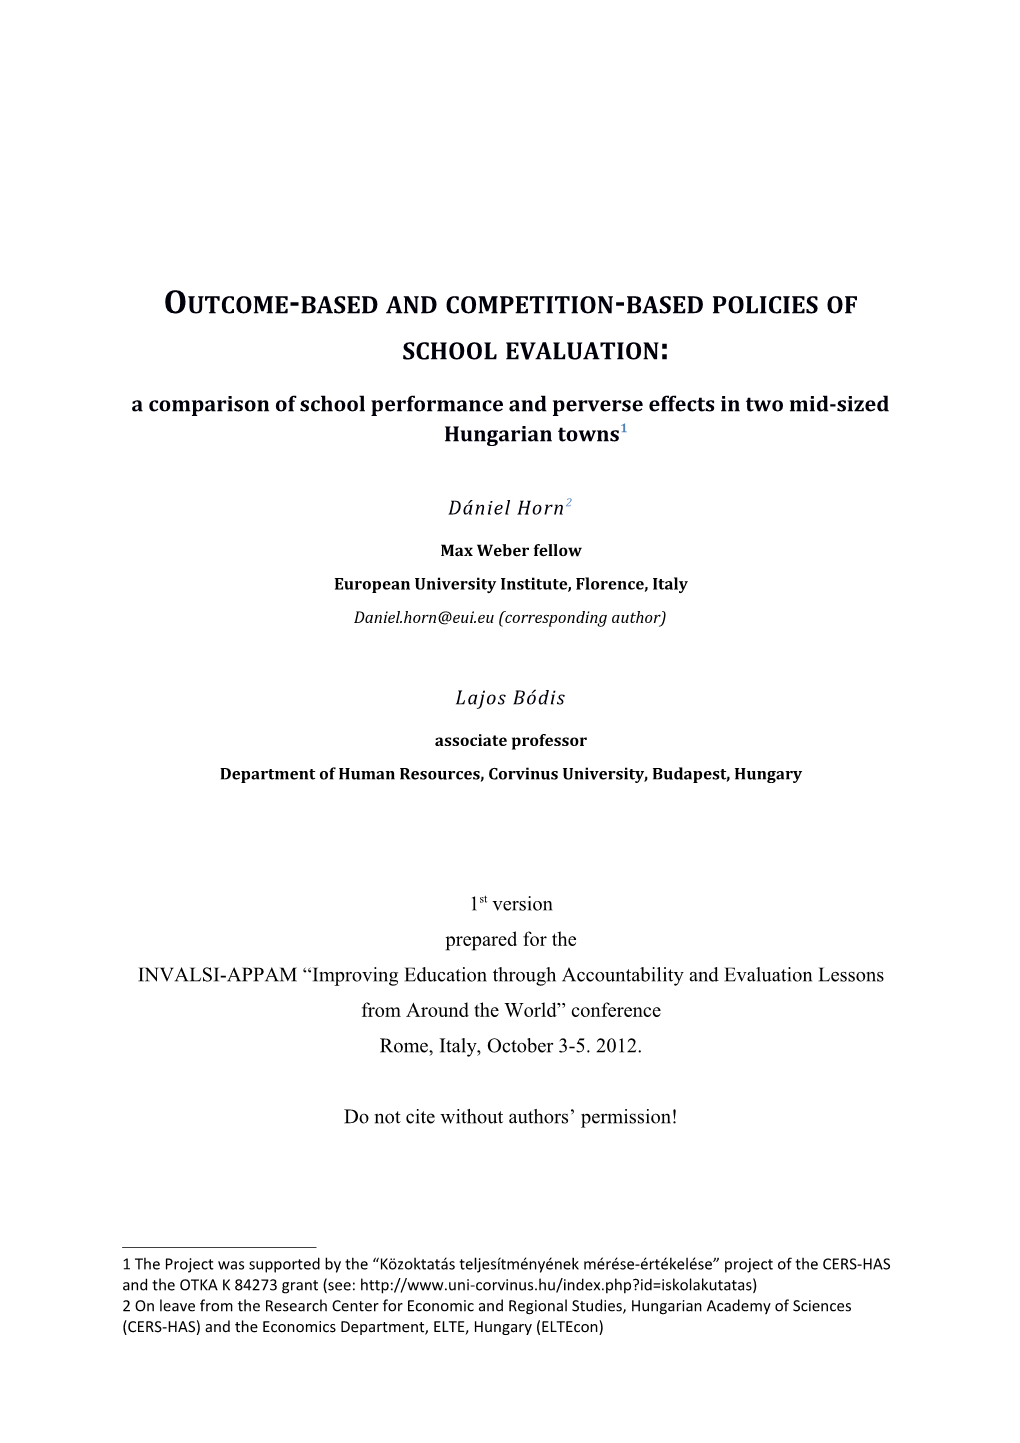 Outcome-Based and Competition-Based Policies of School Evaluation